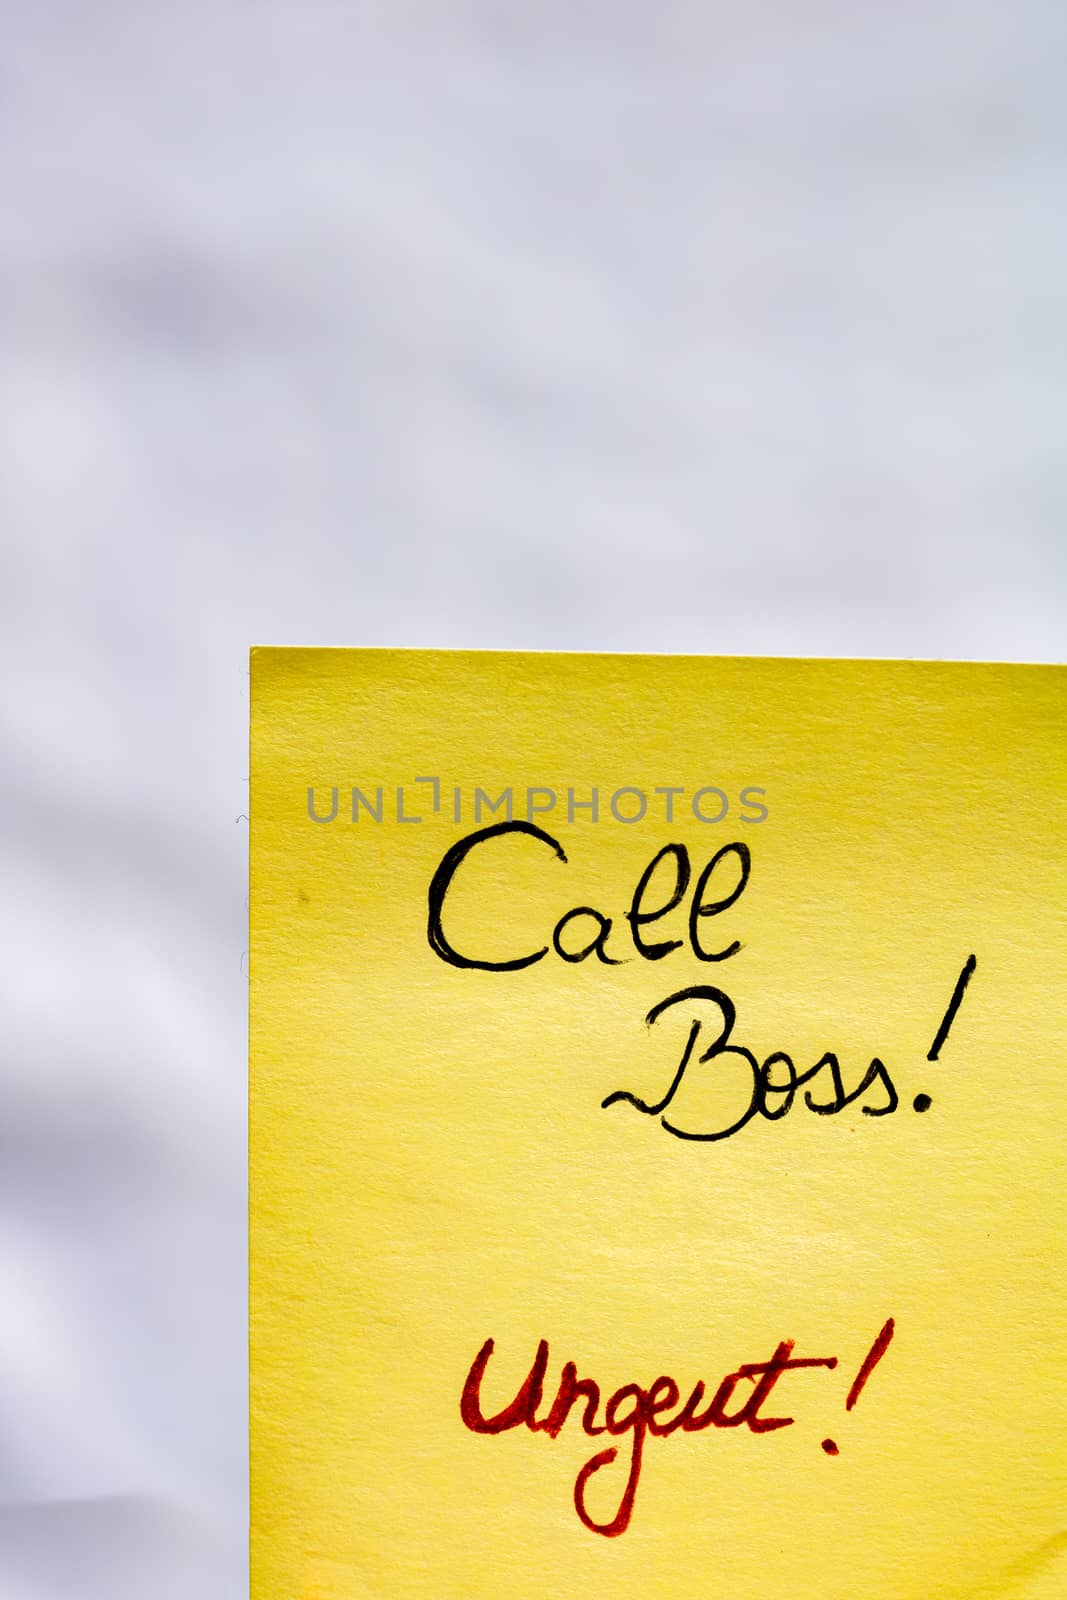 Call boss handwriting text close up isolated on yellow paper with copy space.